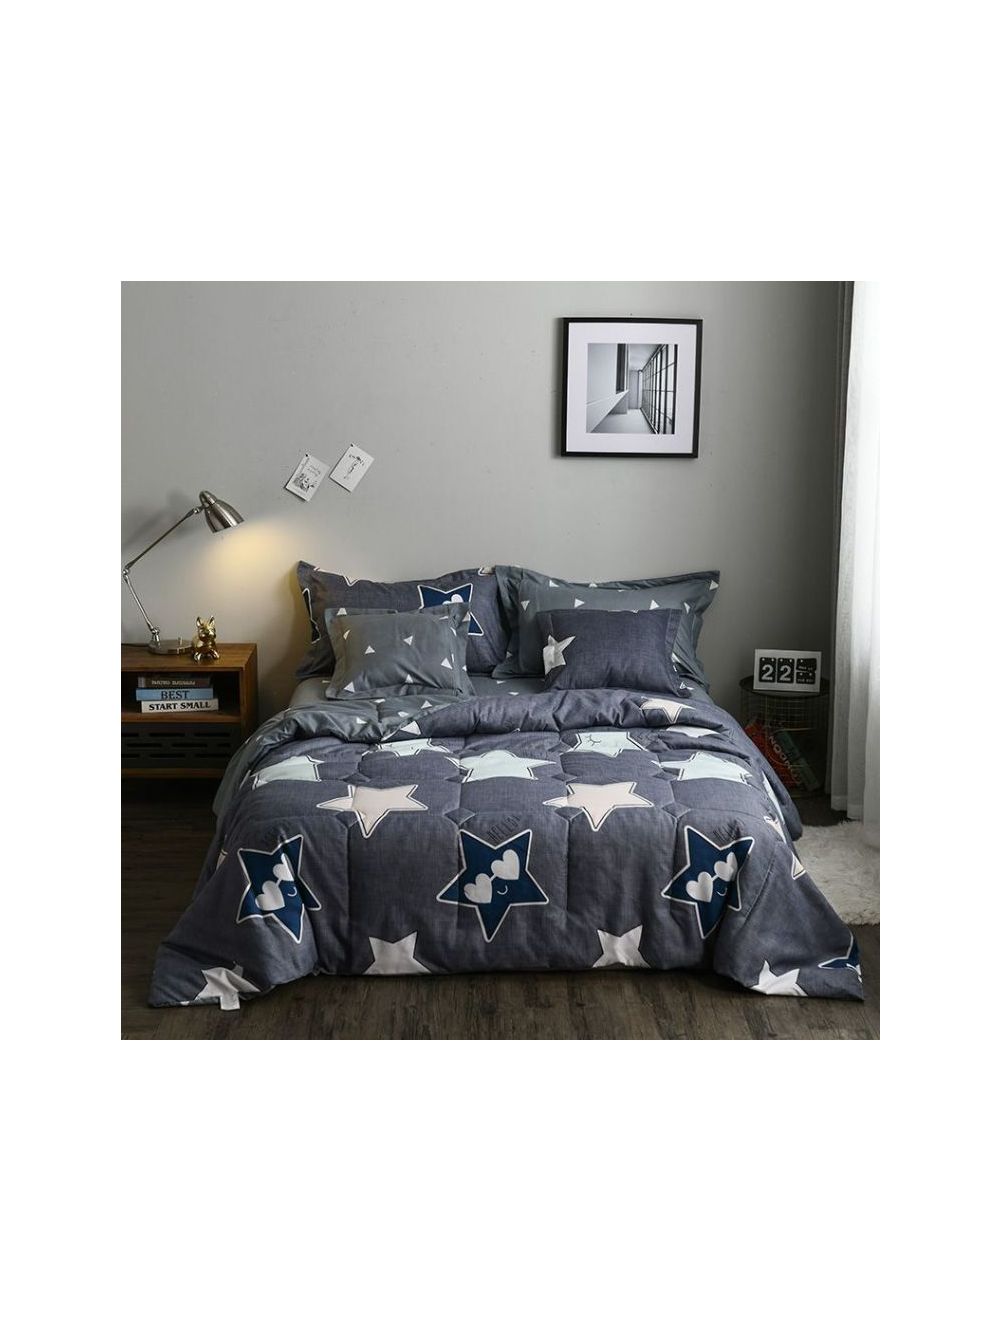 Rishahome 6 Piece Comforter Set (1 comforter+1 fitted sheet+ 2 Large pillow cases+2 medium pillow cases) Microfibre Stary Sky King-SSKMH/06/13